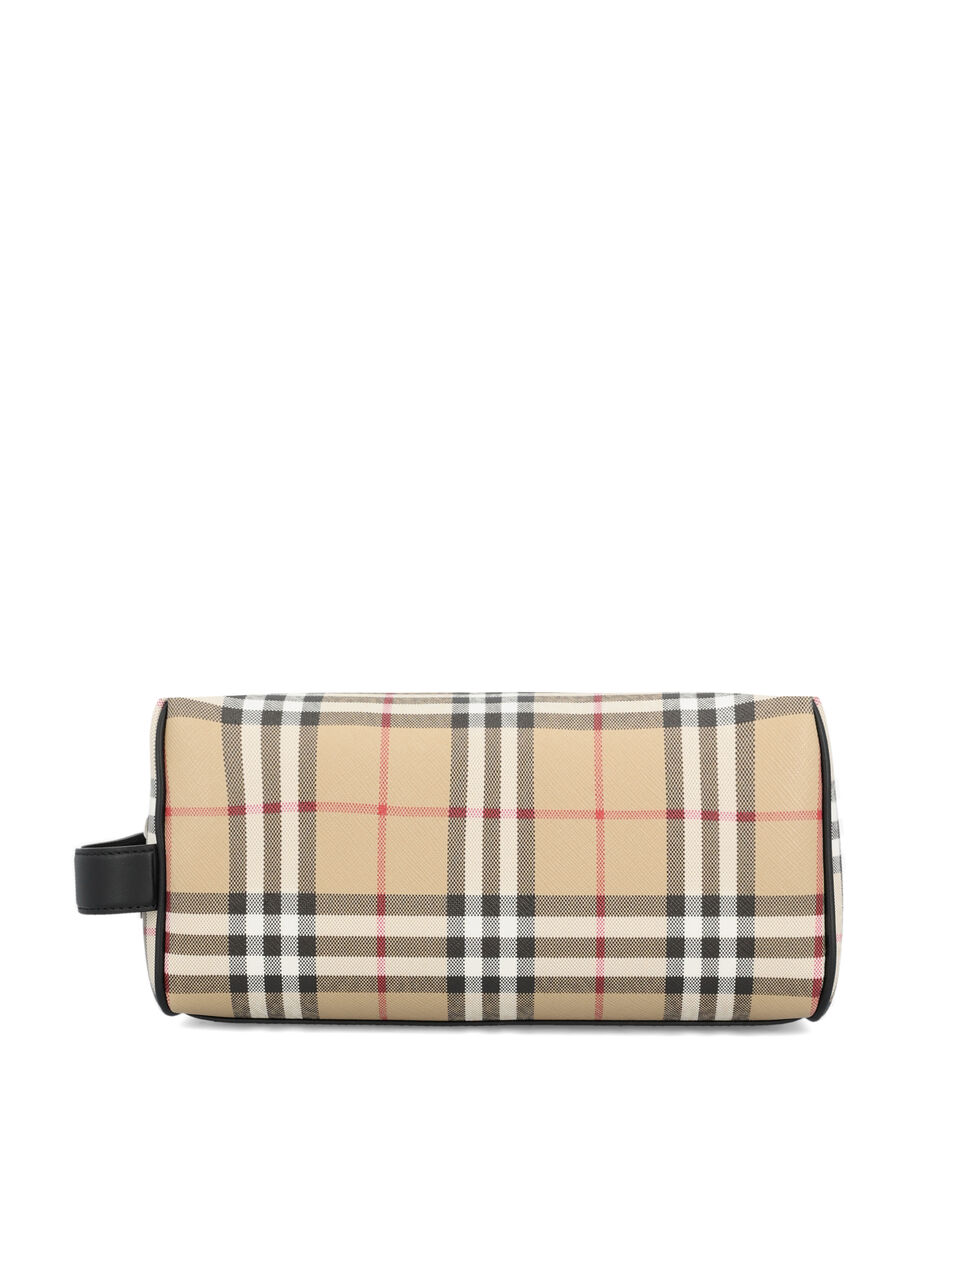 Vintage Check and Leather Travel Pouch BURBERRY | Franz Kraler